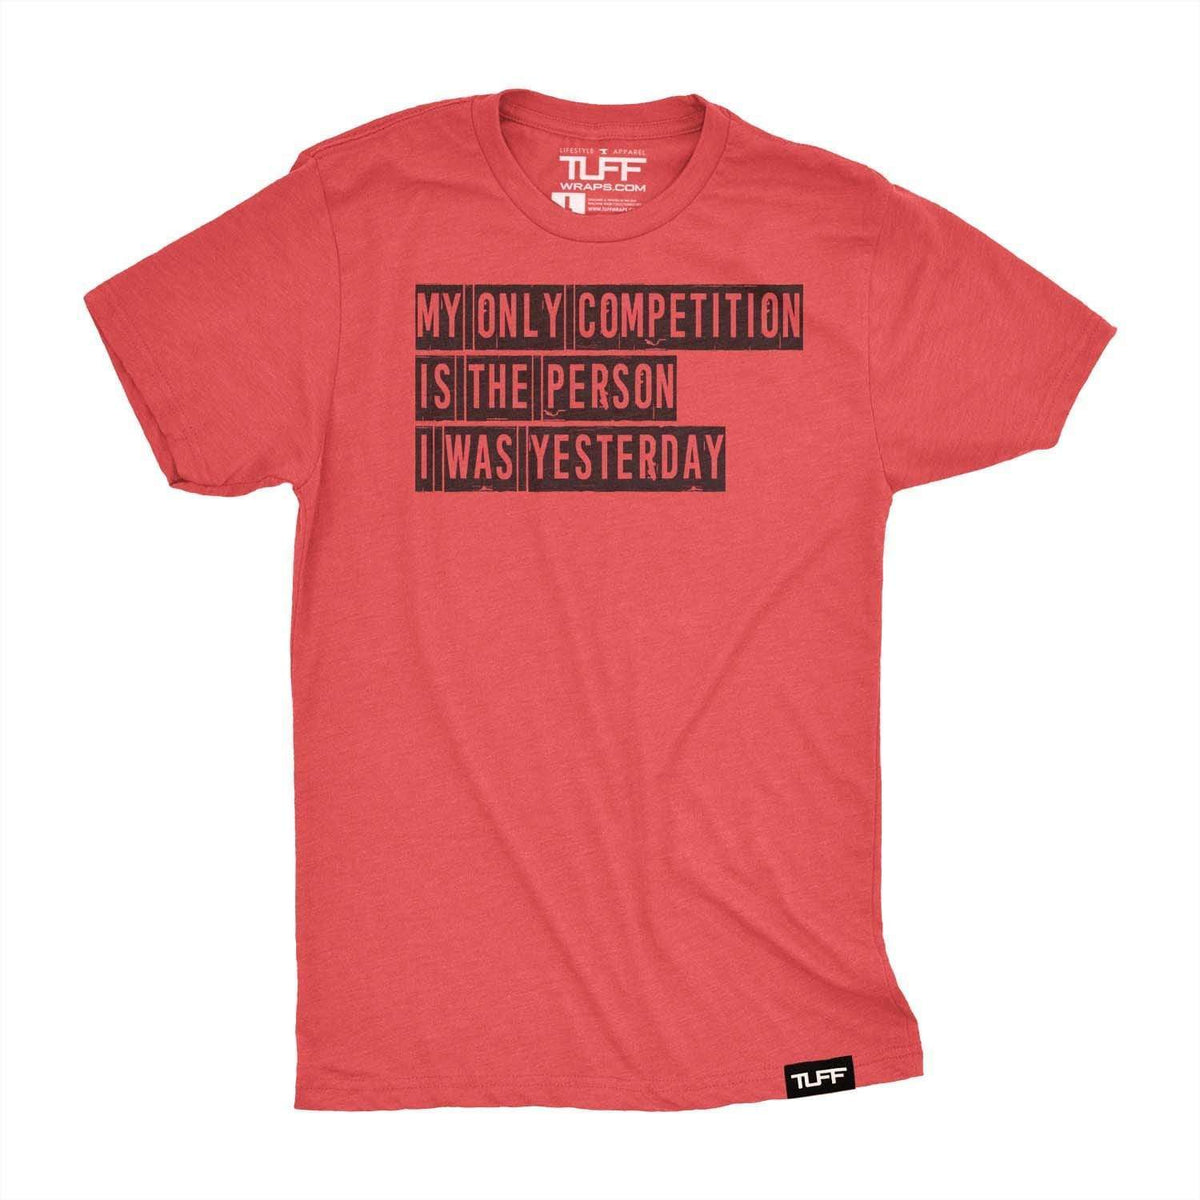 My Only Competition Tee S / Vintage Red TuffWraps.com